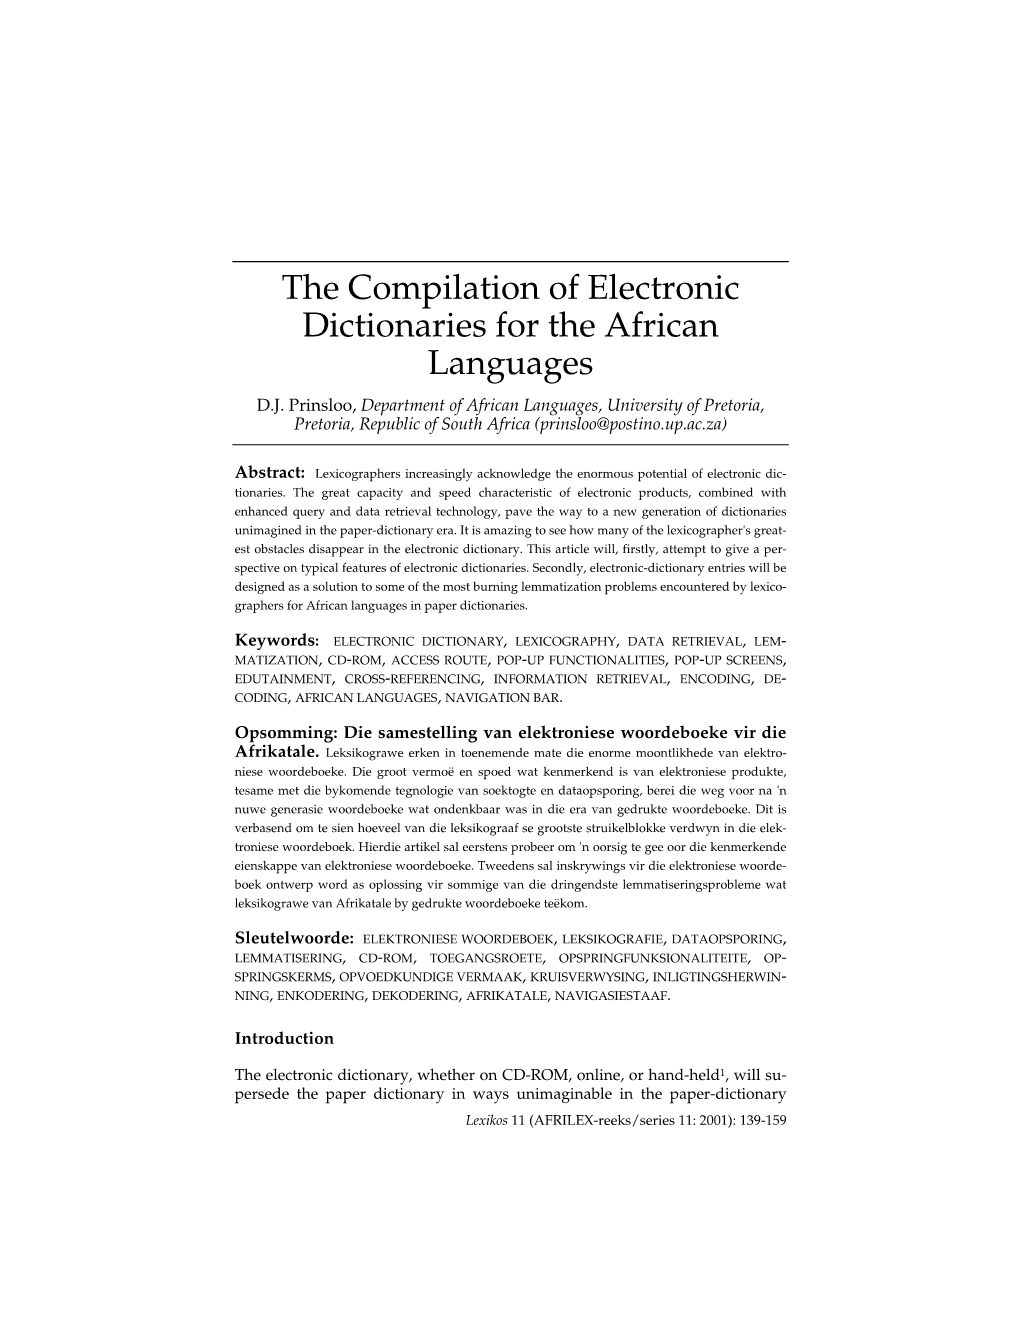 The Compilation of Electronic Dictionaries for the African Languages D.J